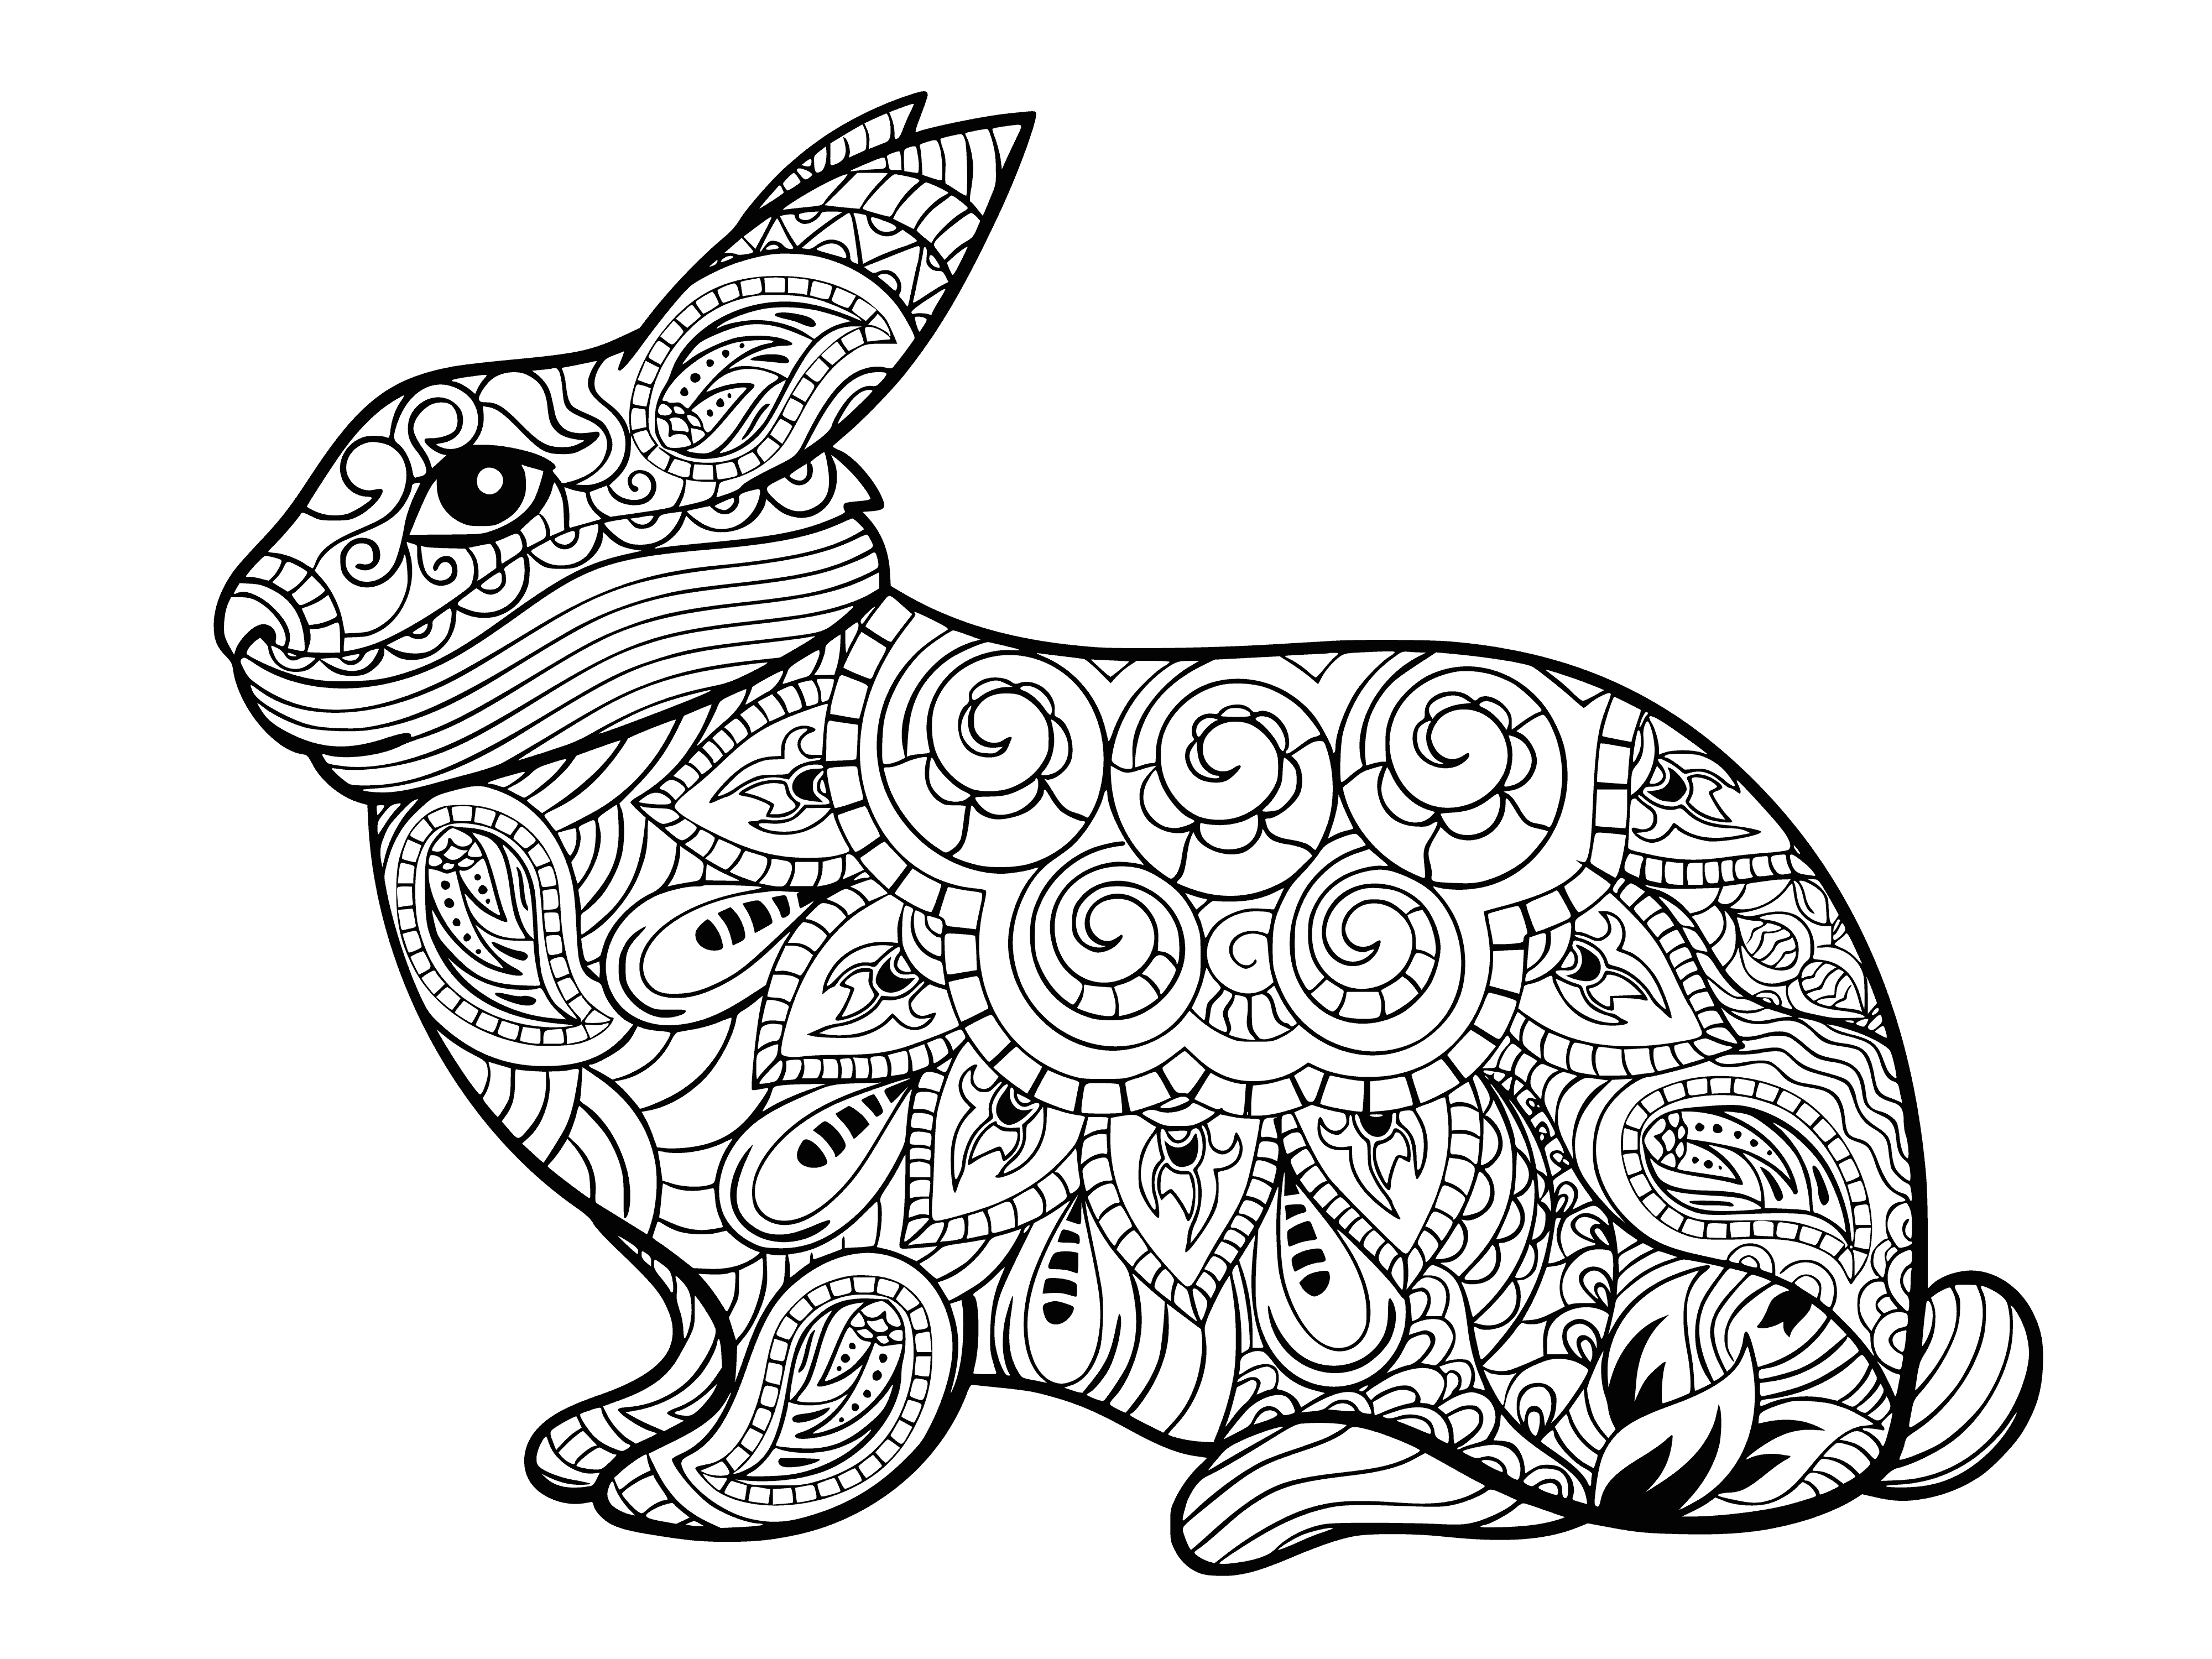 coloring page: Coloring pages featuring a cute bunny rabbit surrounded by flowers and butterflies to relieve stress and spark creativity.